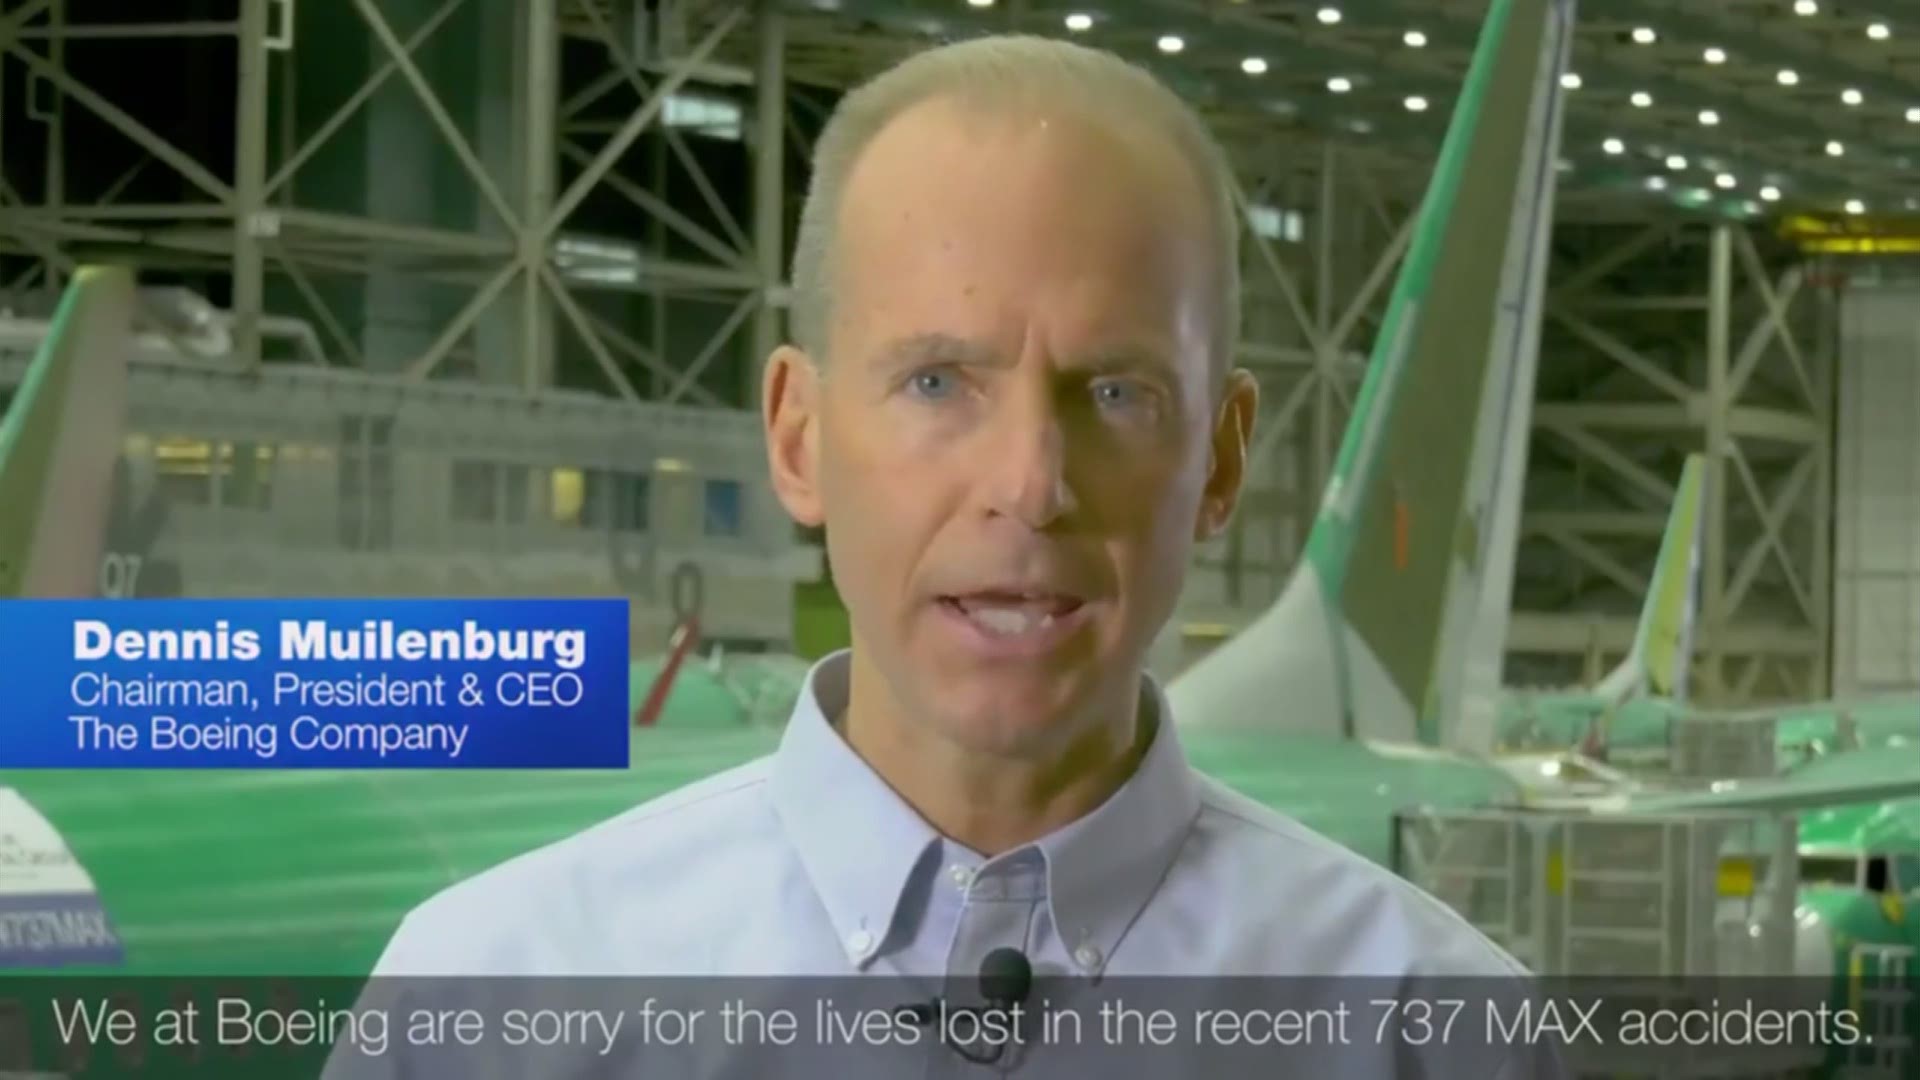 Following a preliminary report of a deadly crash involving a Boeing 737 MAX 8, Boeing CEO Dennis Muilenburg said the company is "sorry for the lives lost."